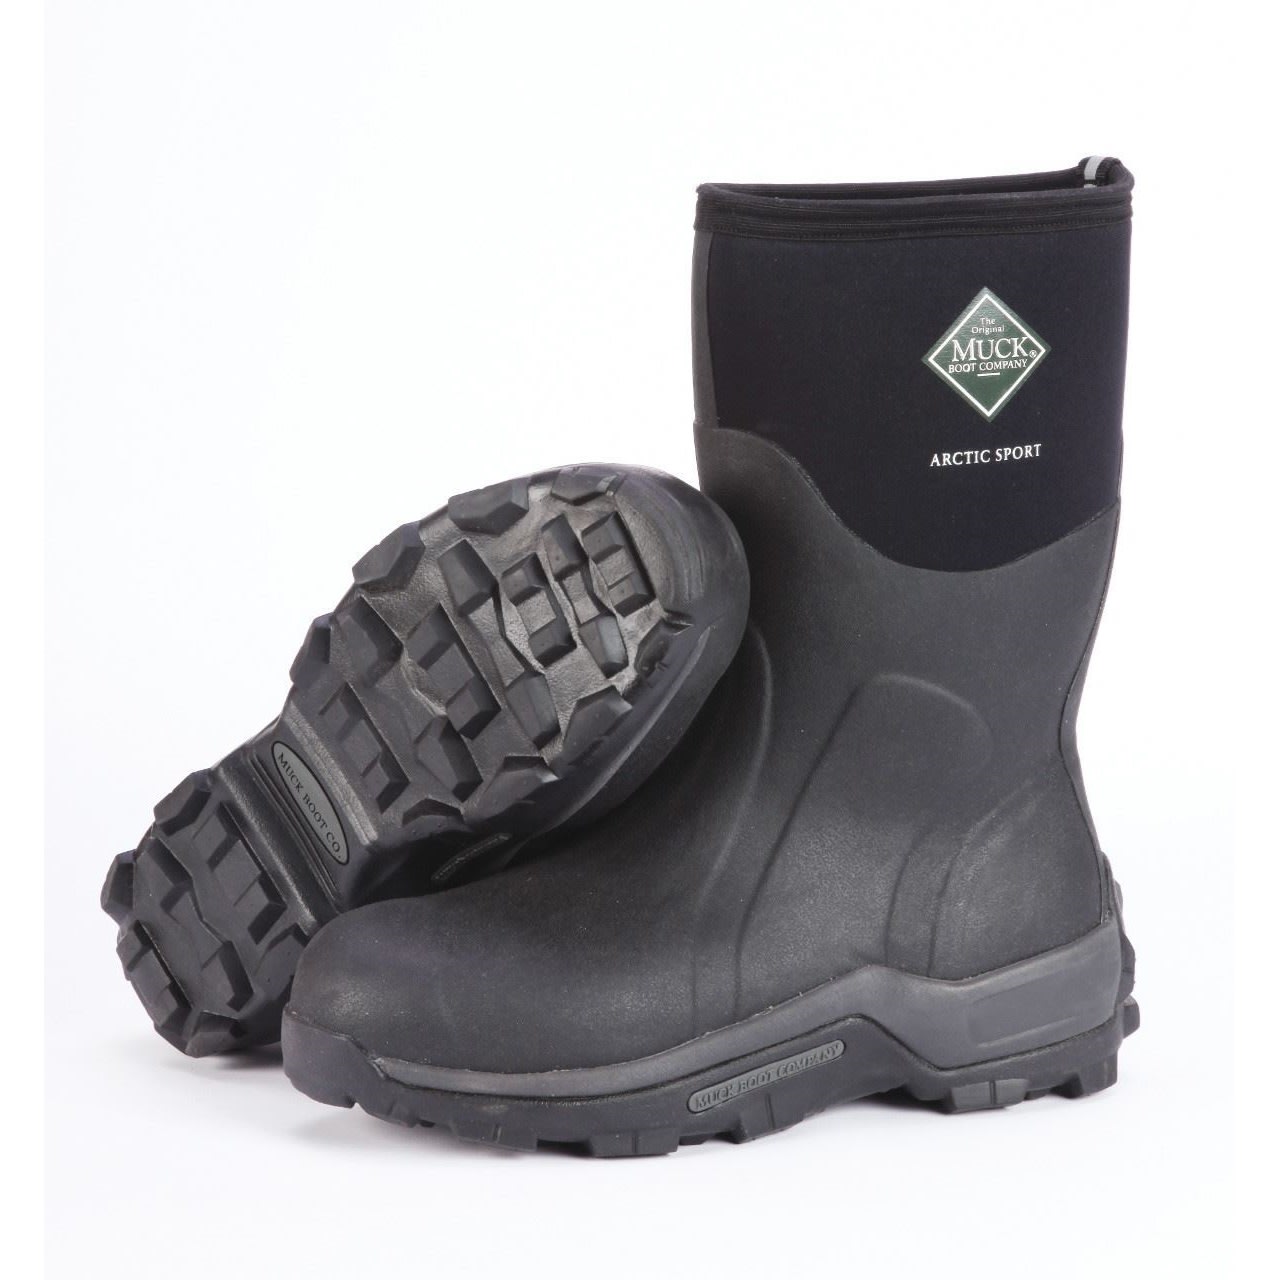 Buy Muck Boot Men's Arctic Sport Mid from Outnorth